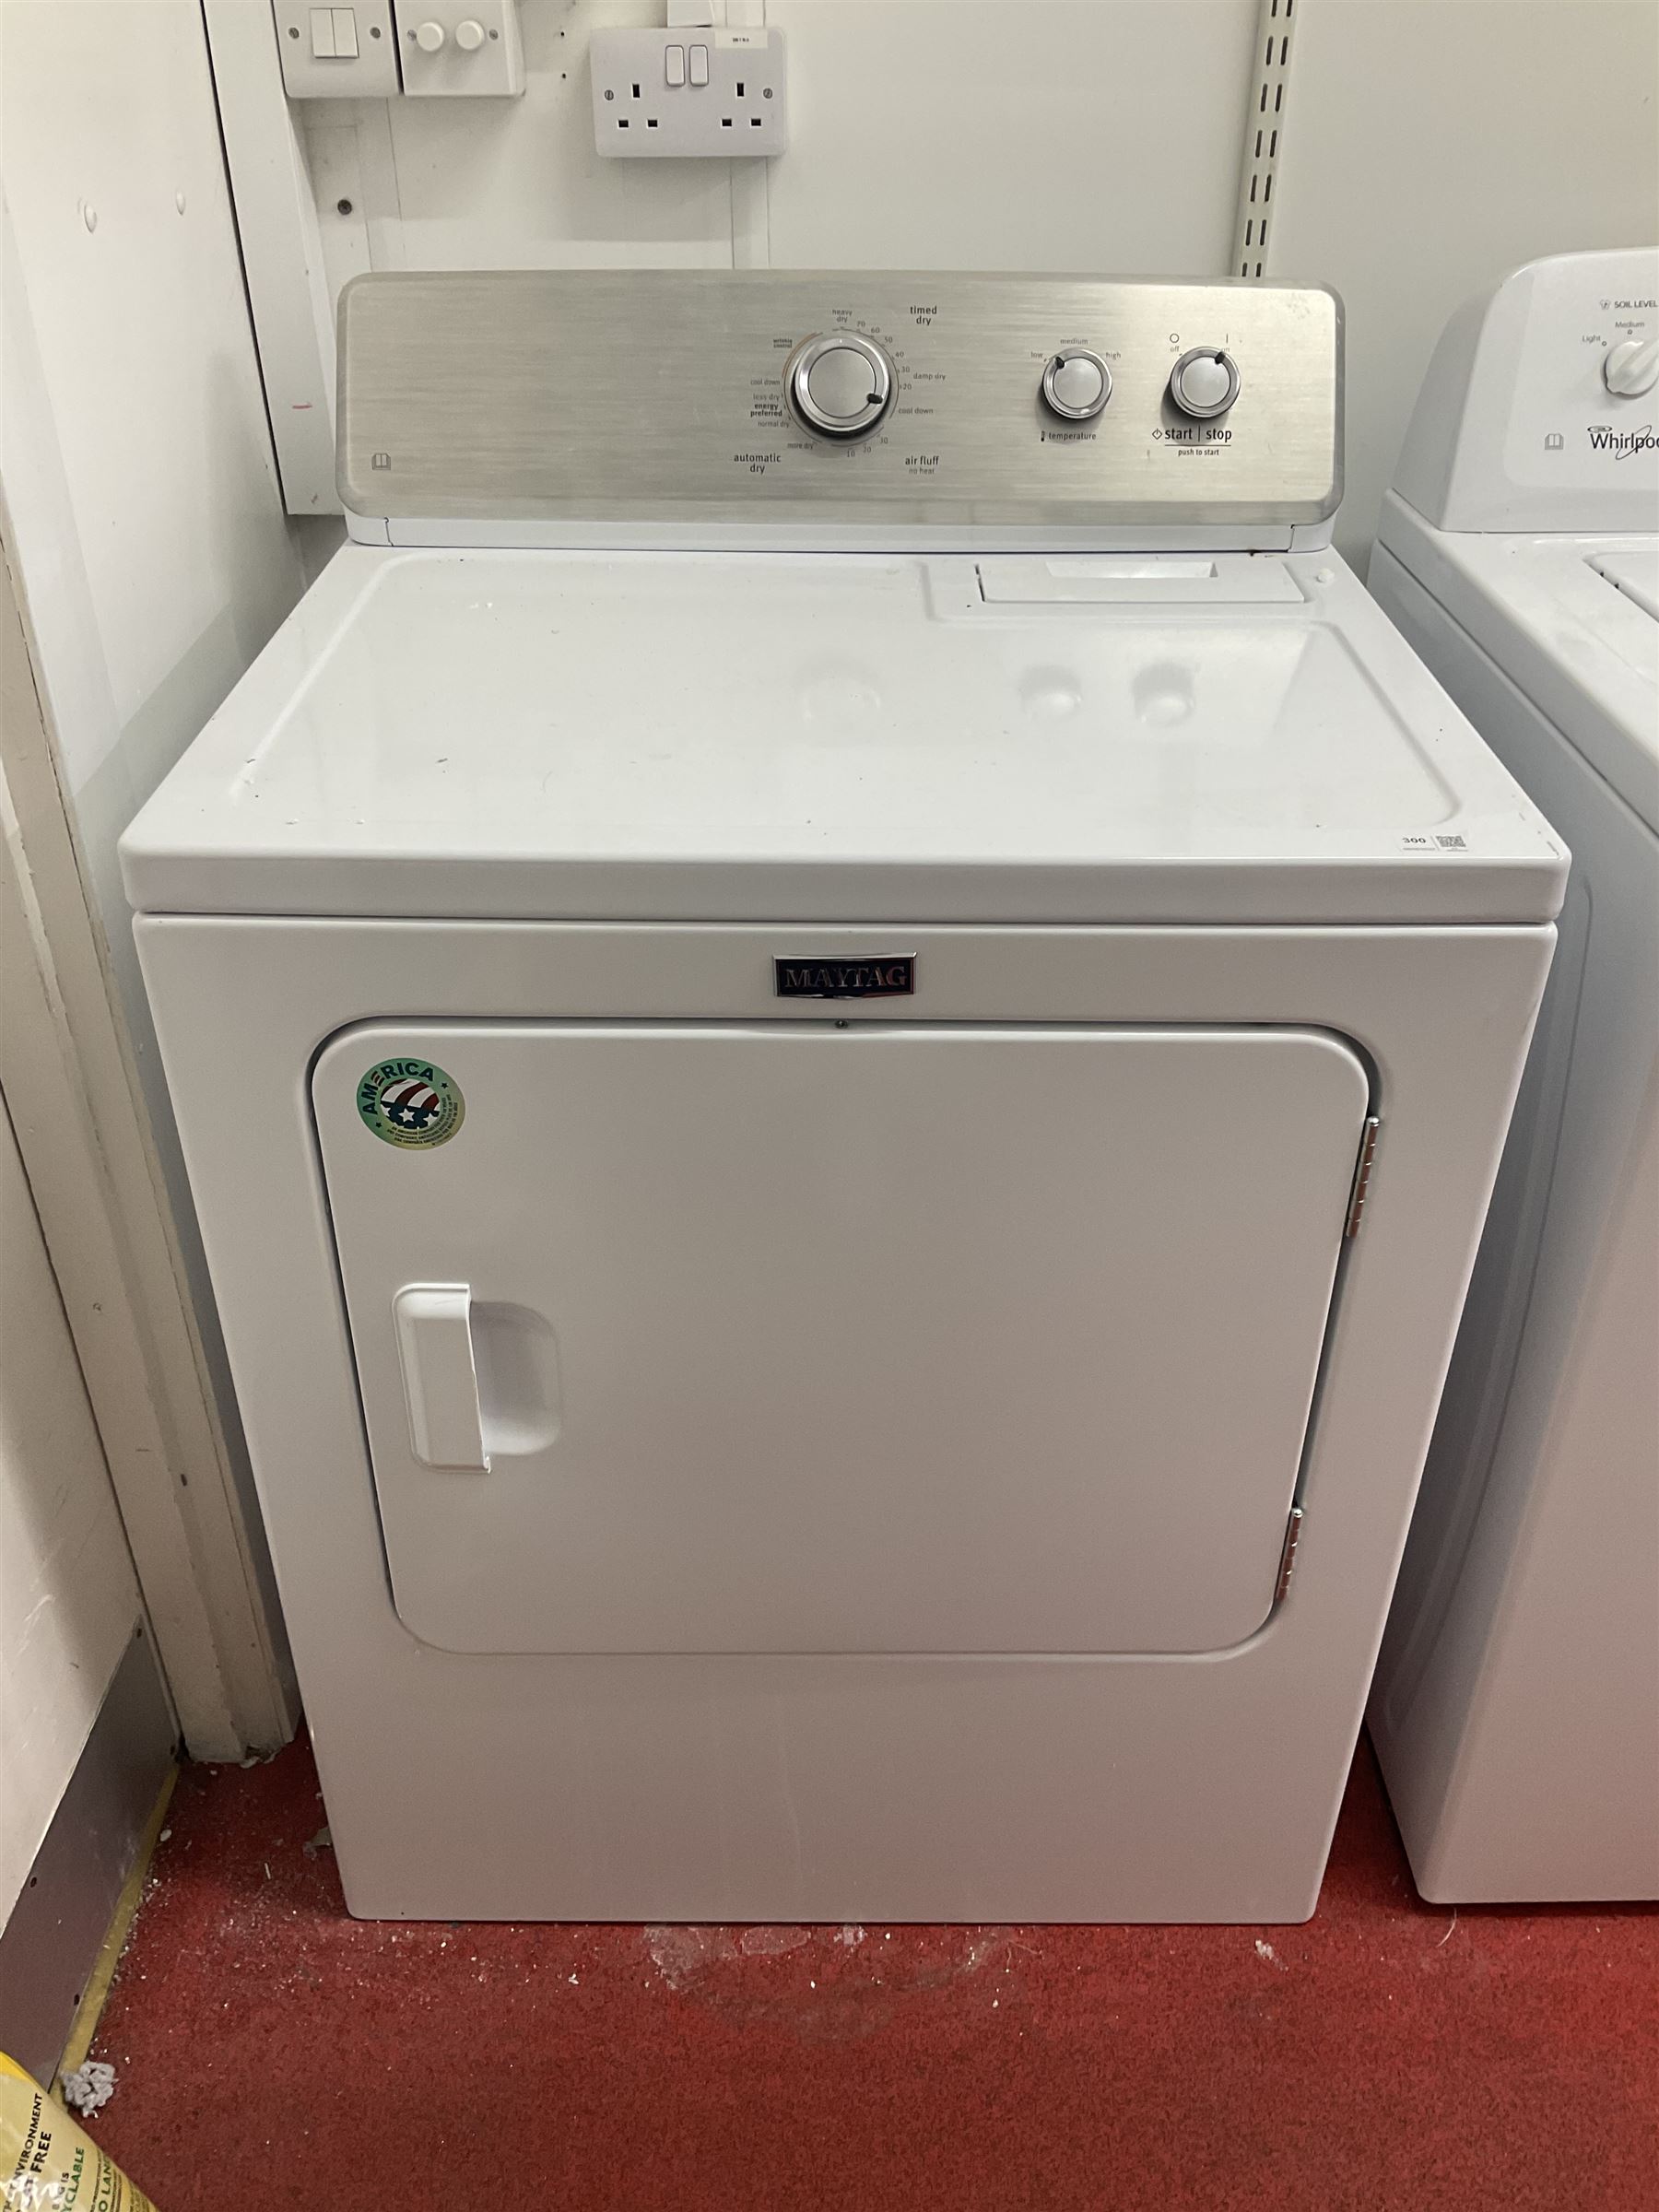 Maytag 3LMEDC315FWO tumble dryer- LOT SUBJECT TO VAT ON THE HAMMER PRICE - To be collected by